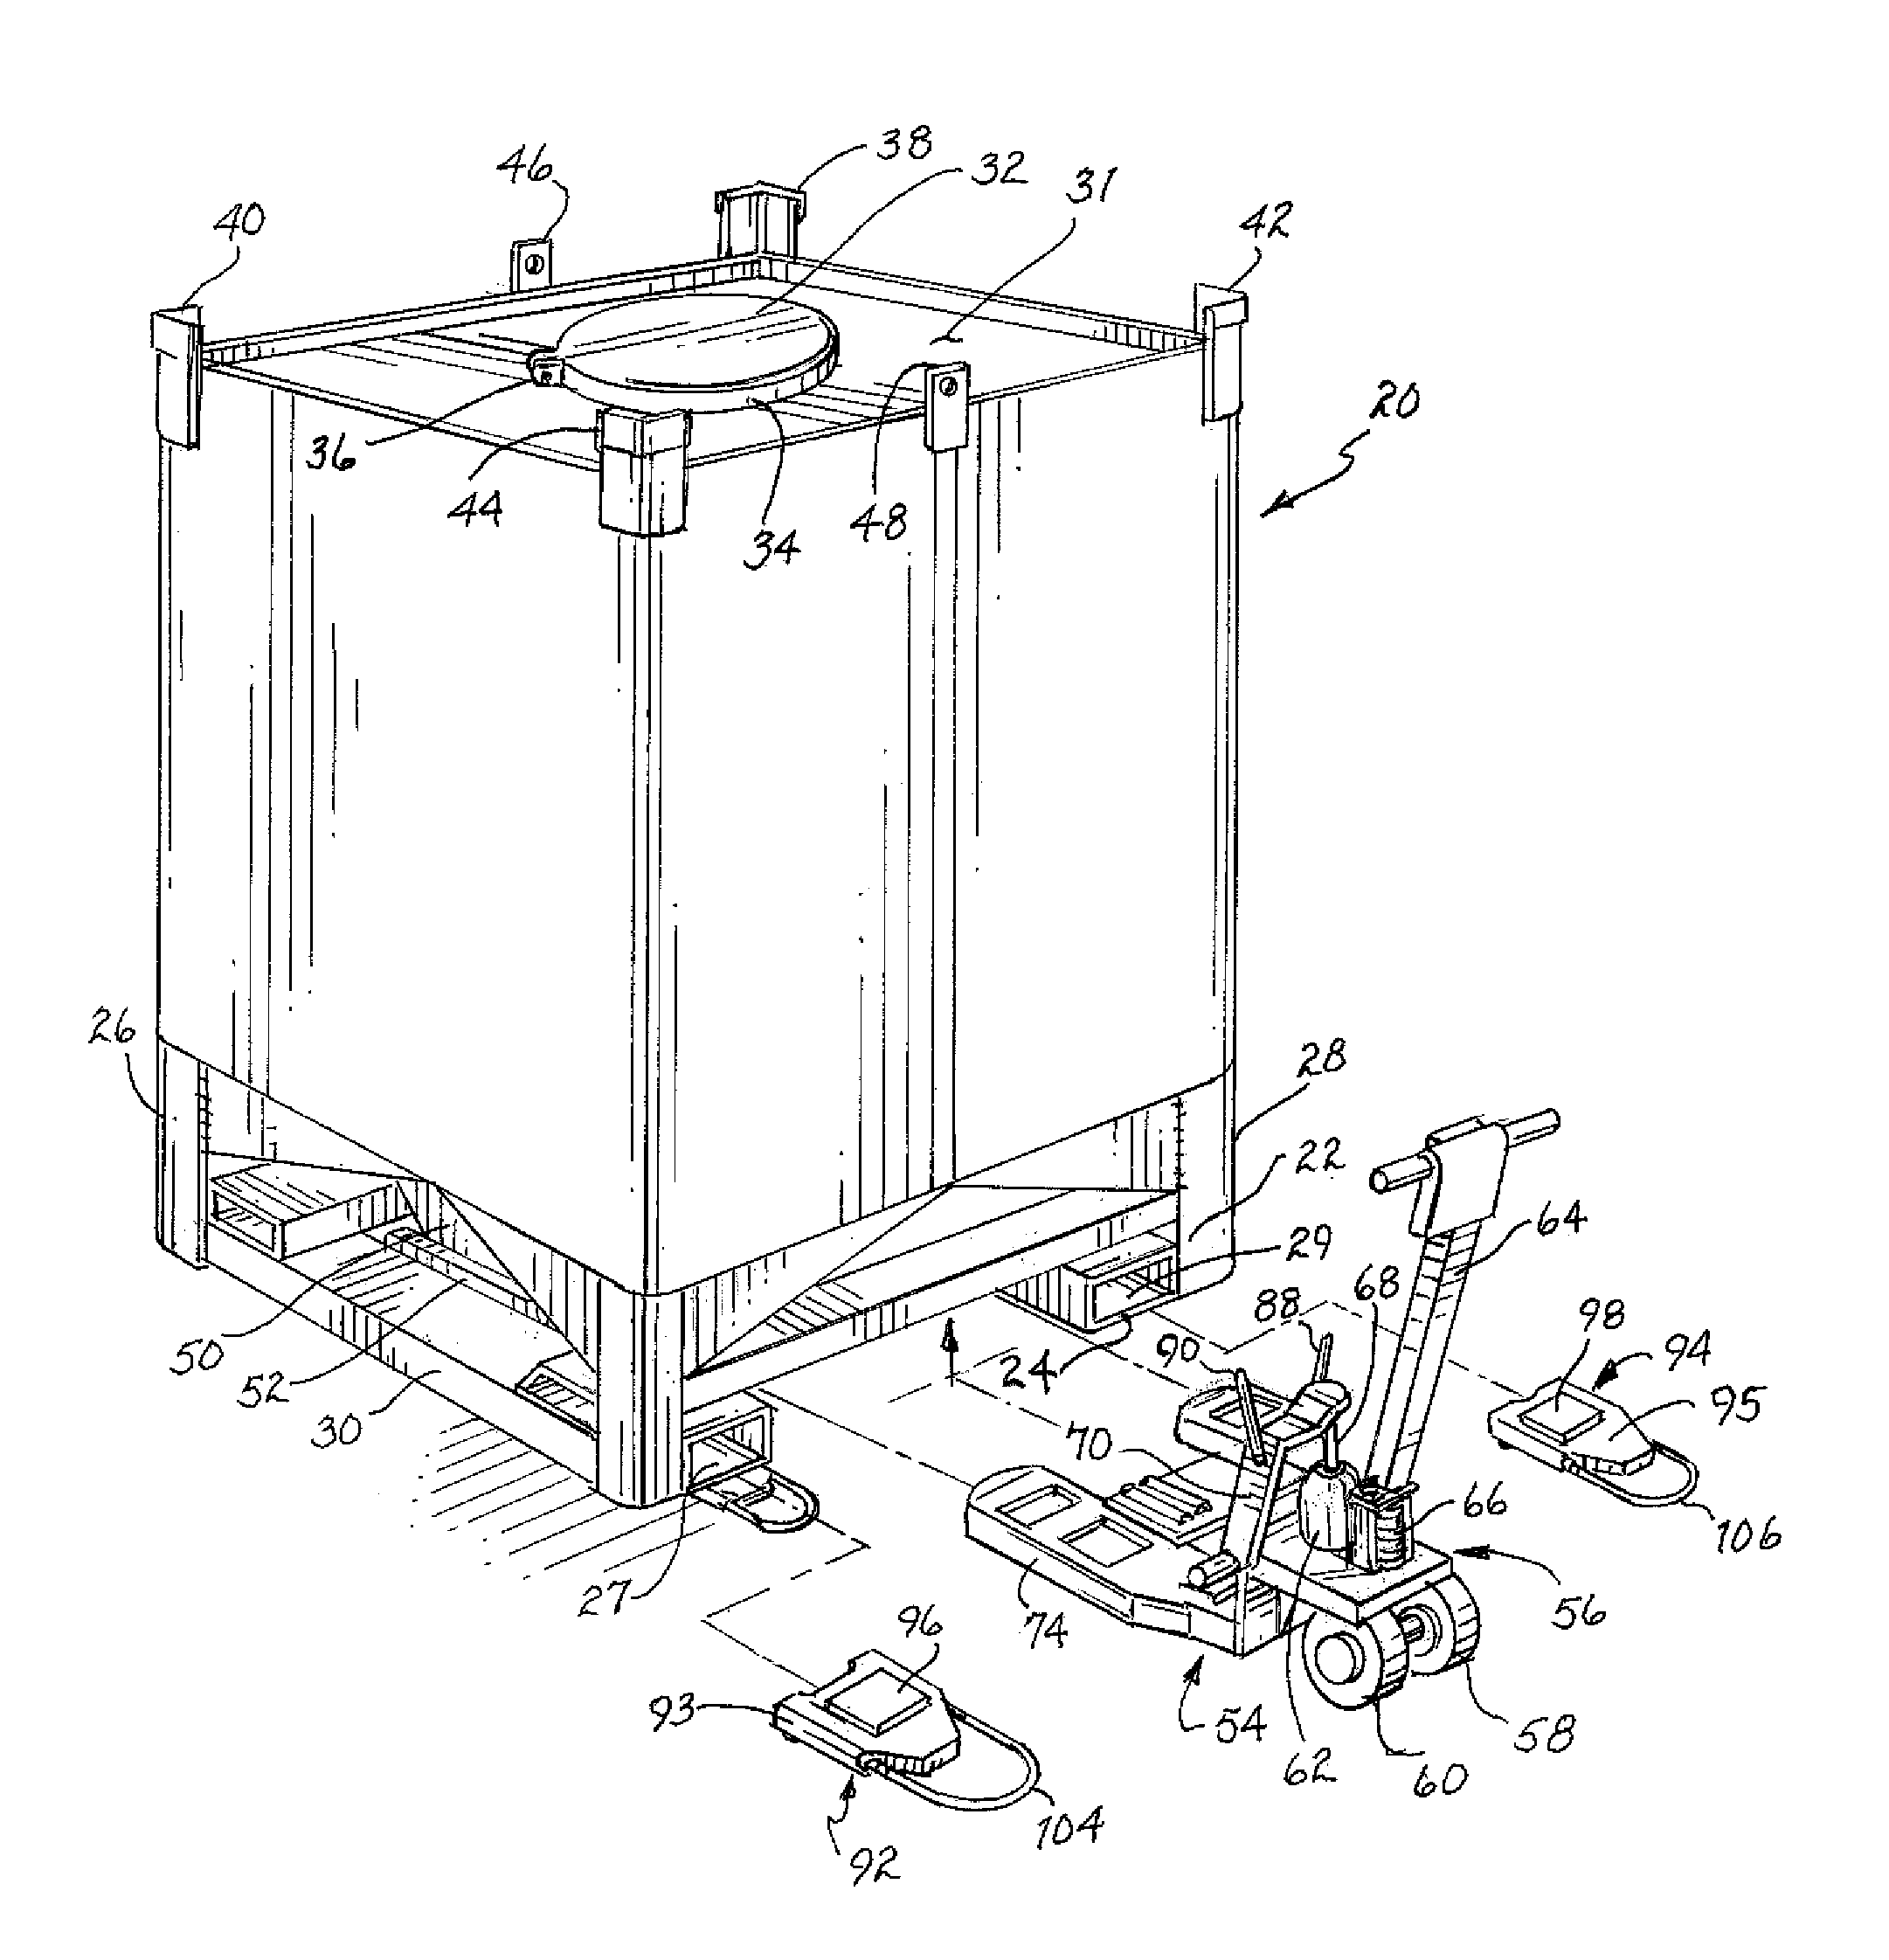 Apparatus and method for moving catalyst bins